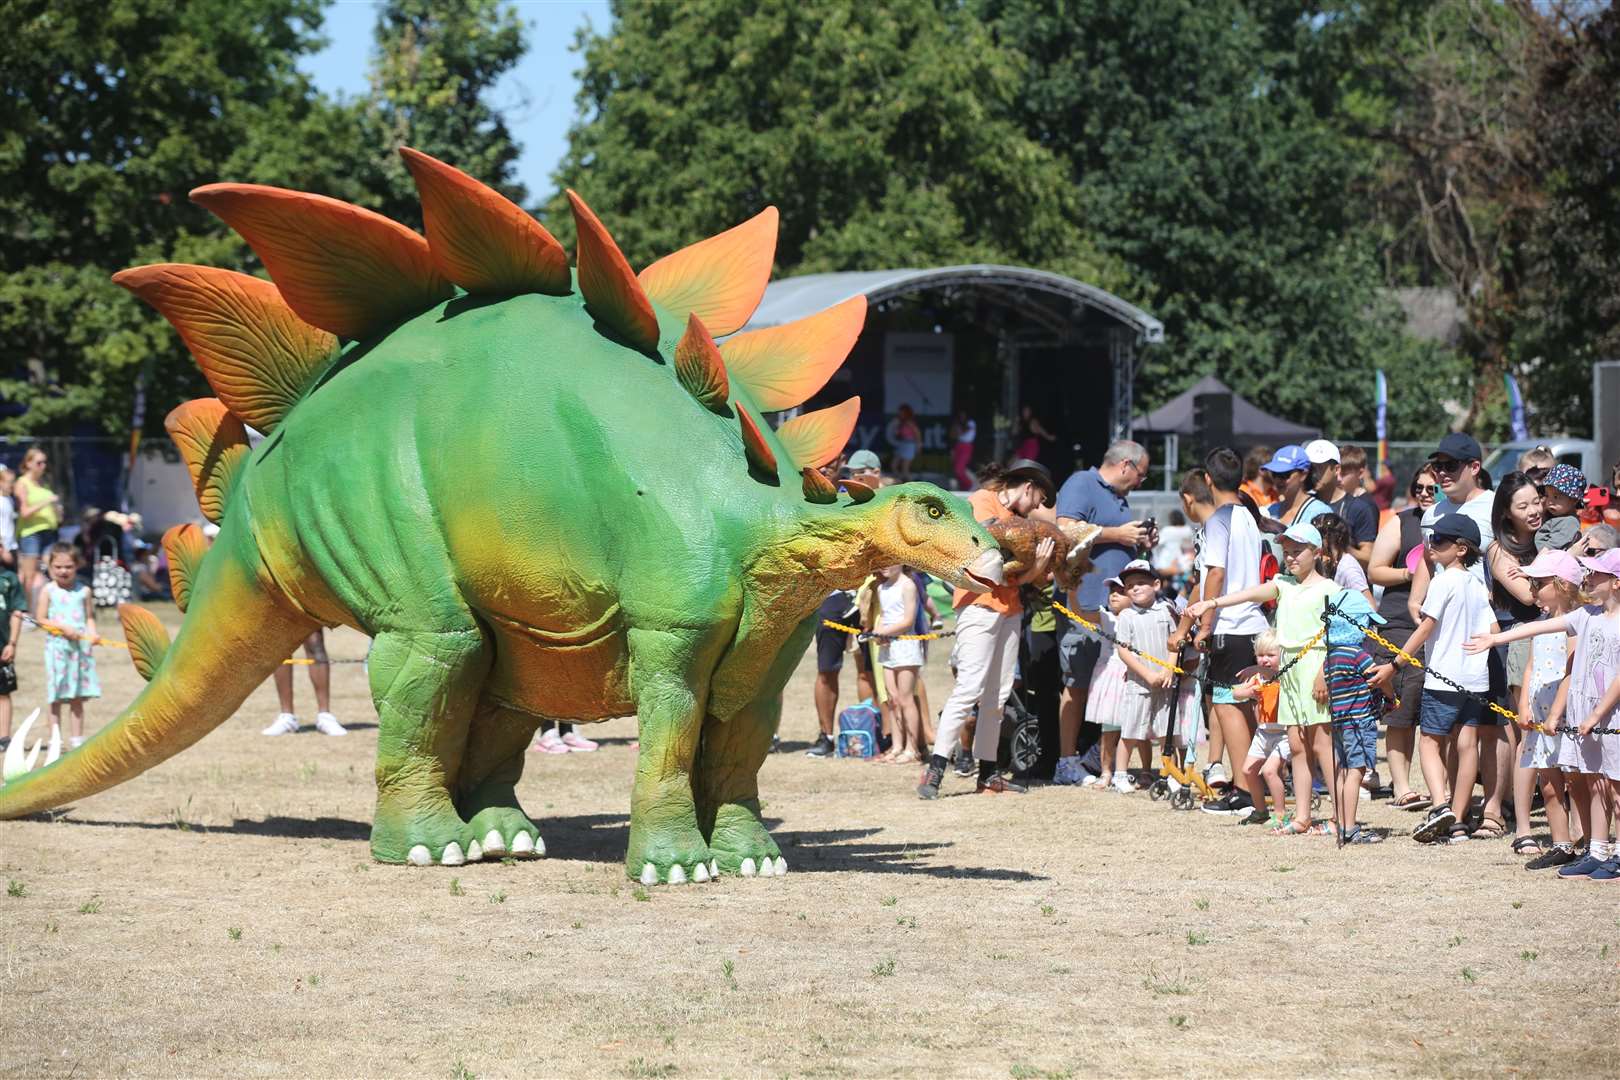 Dinosaurs even made an appearance as they roamed the crowds. Picture: Andy Barnes Photography